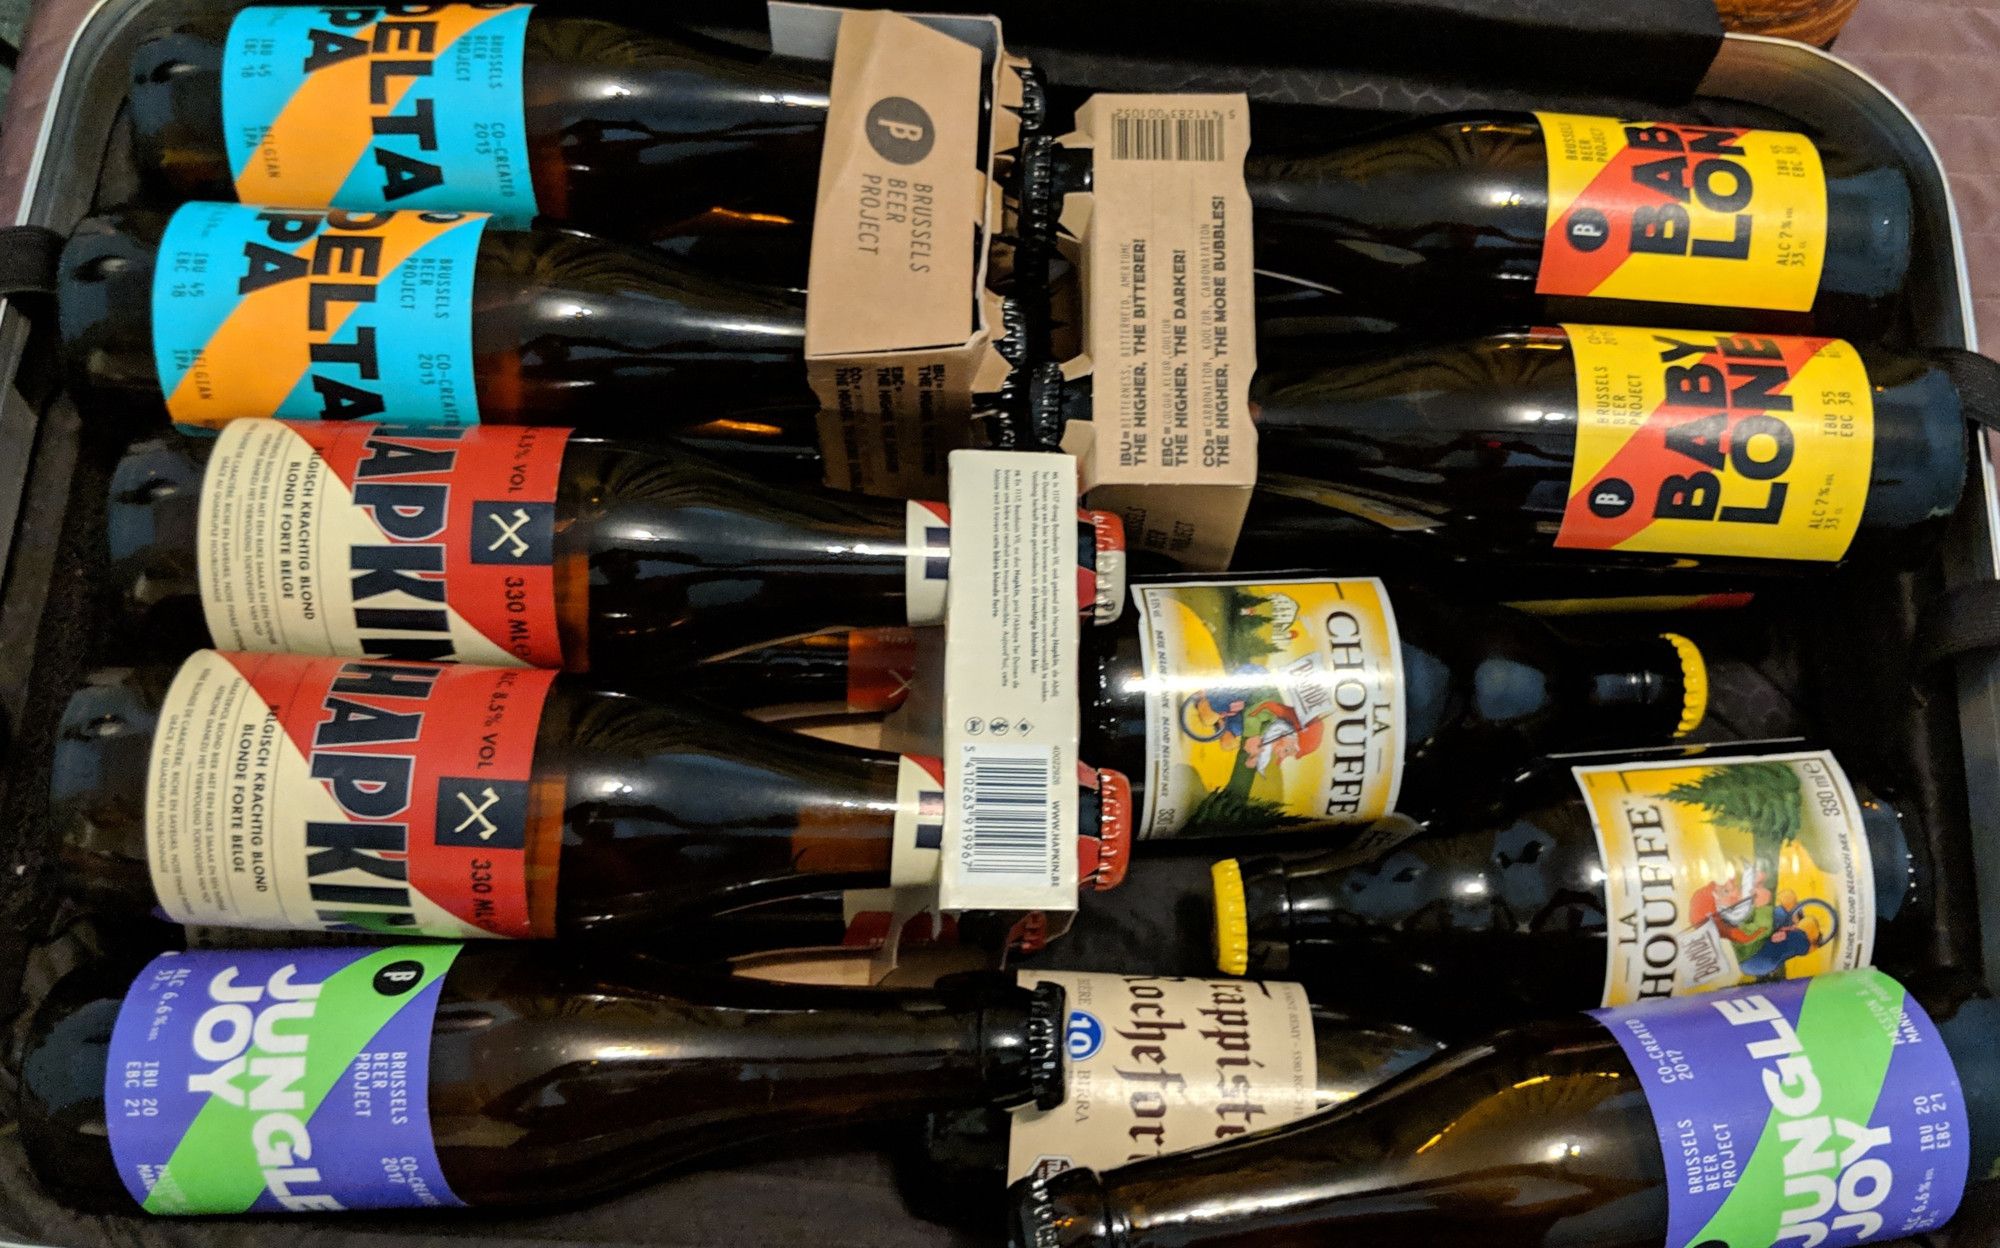 FOSDEM'19 Brussels - Belgian Beers are a must as a gift